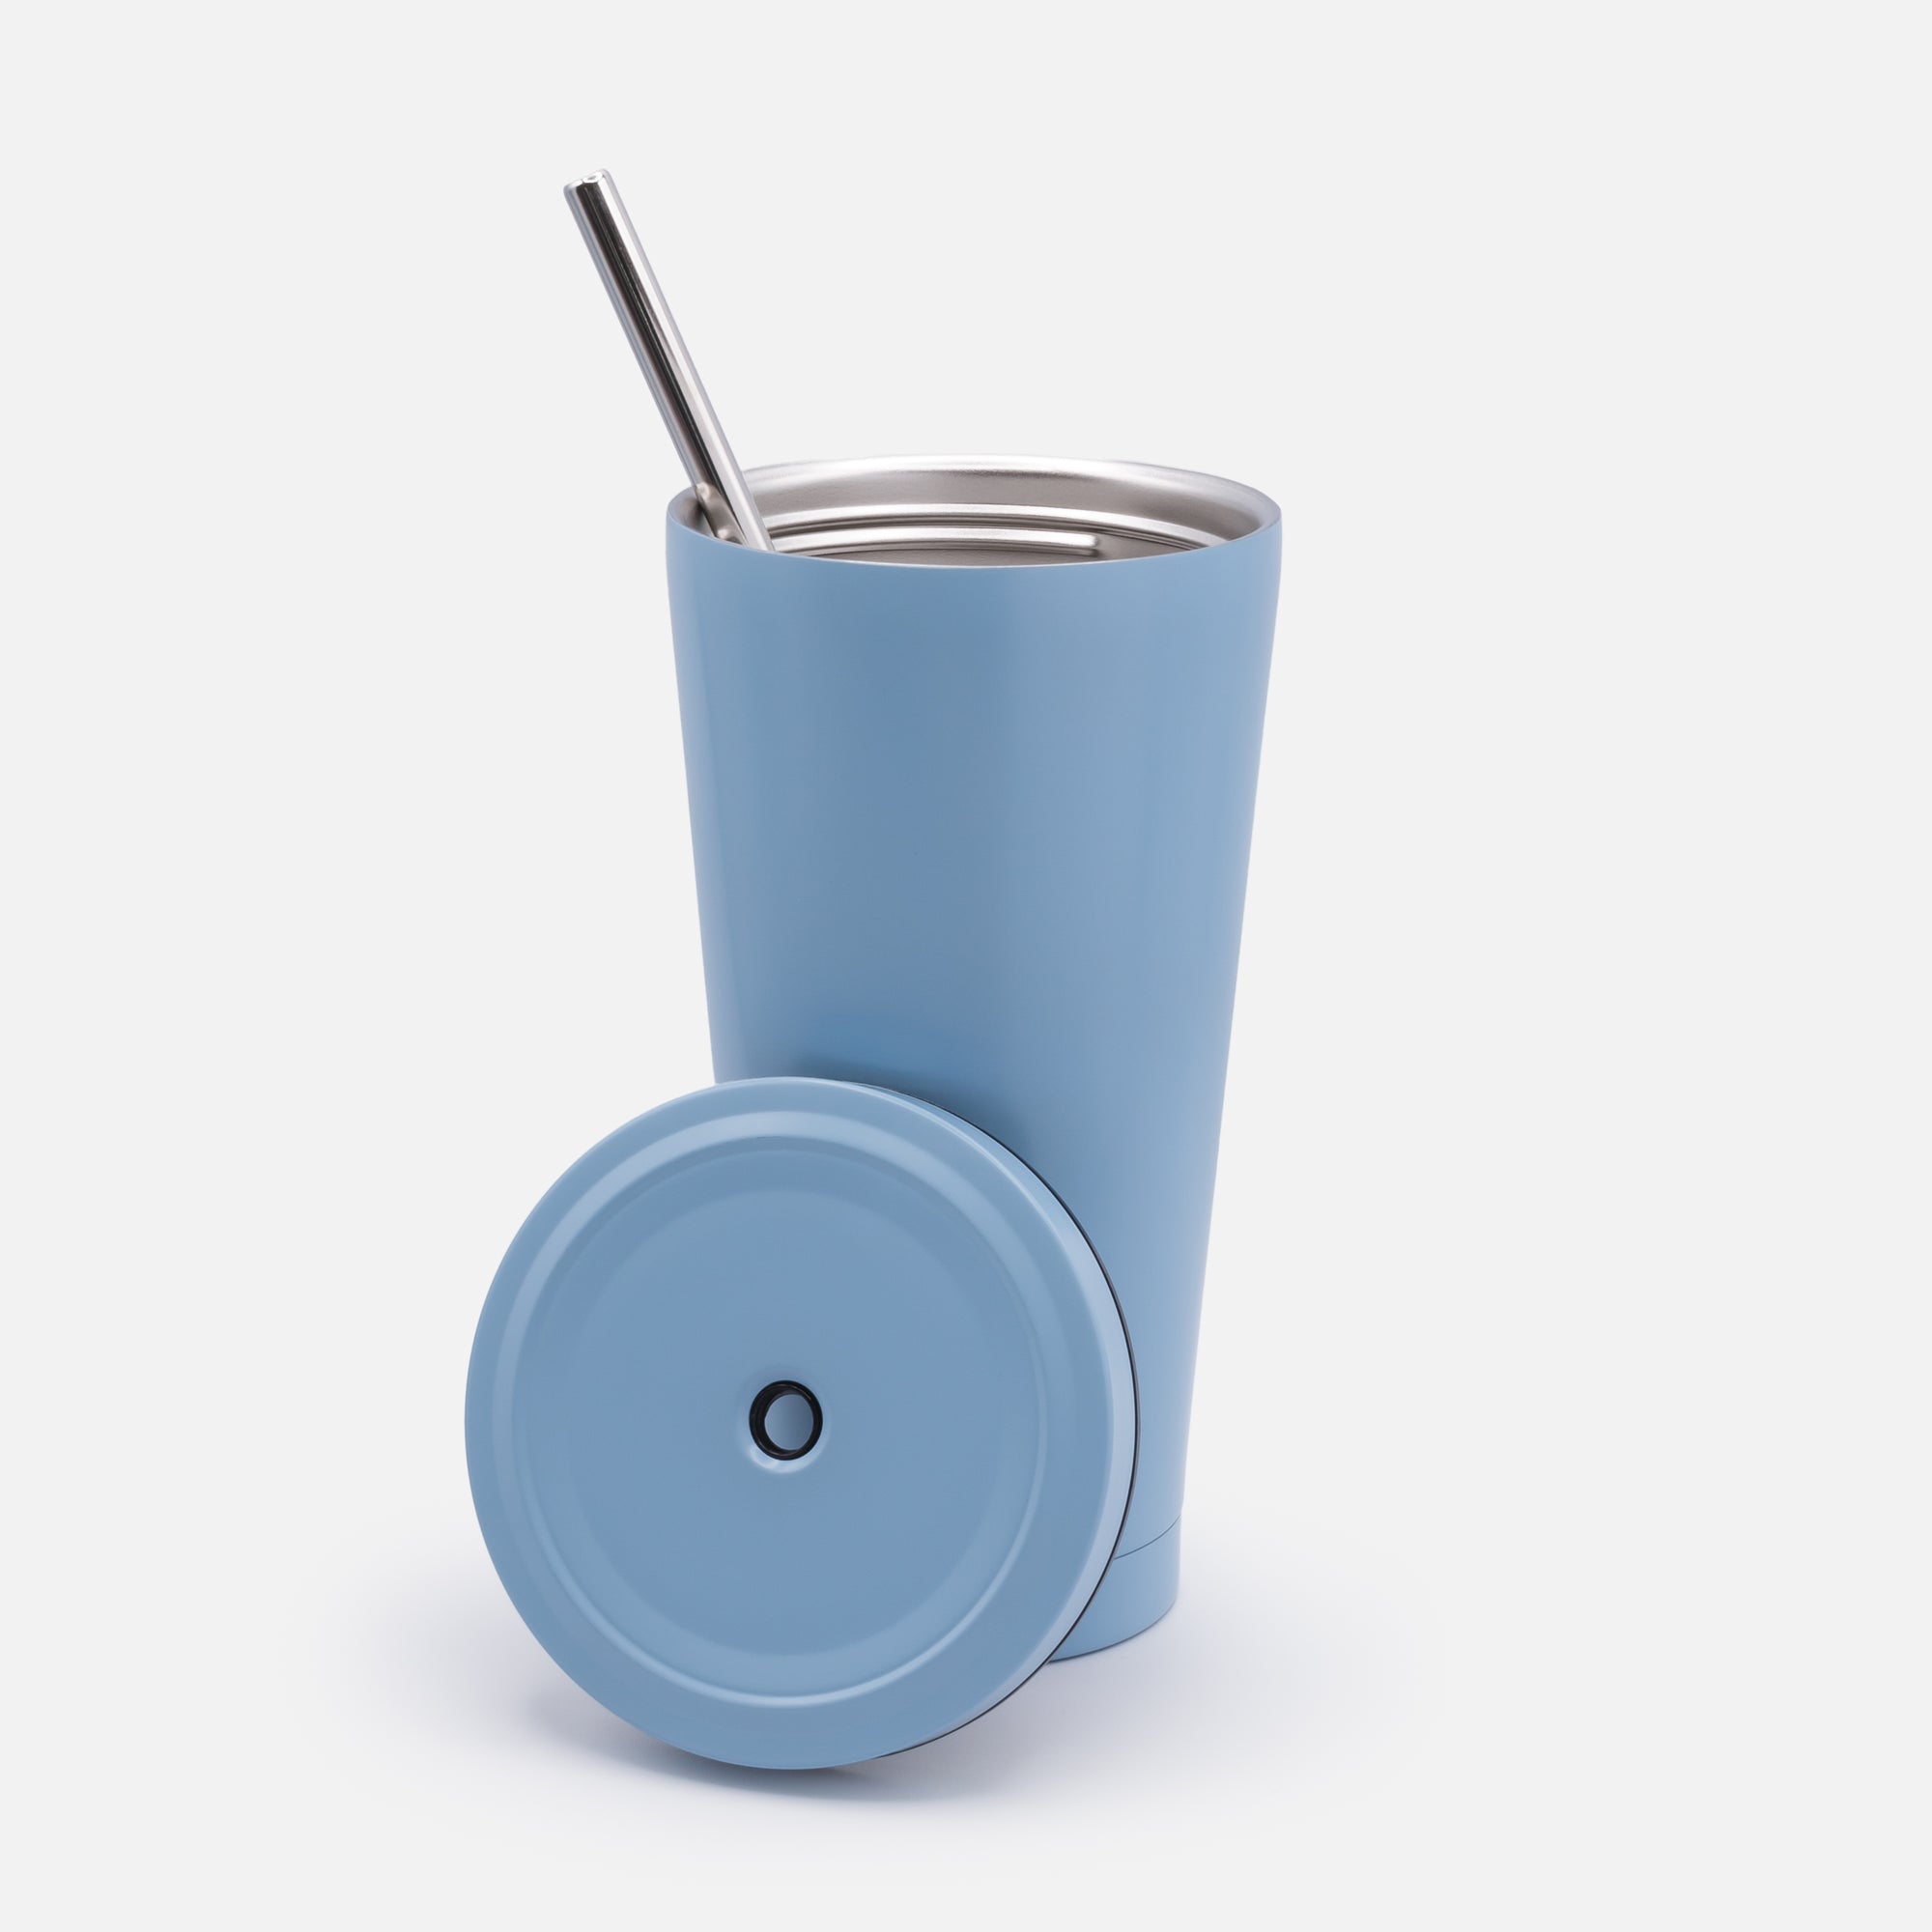 Blue-gray travel mug with stainless steel straw